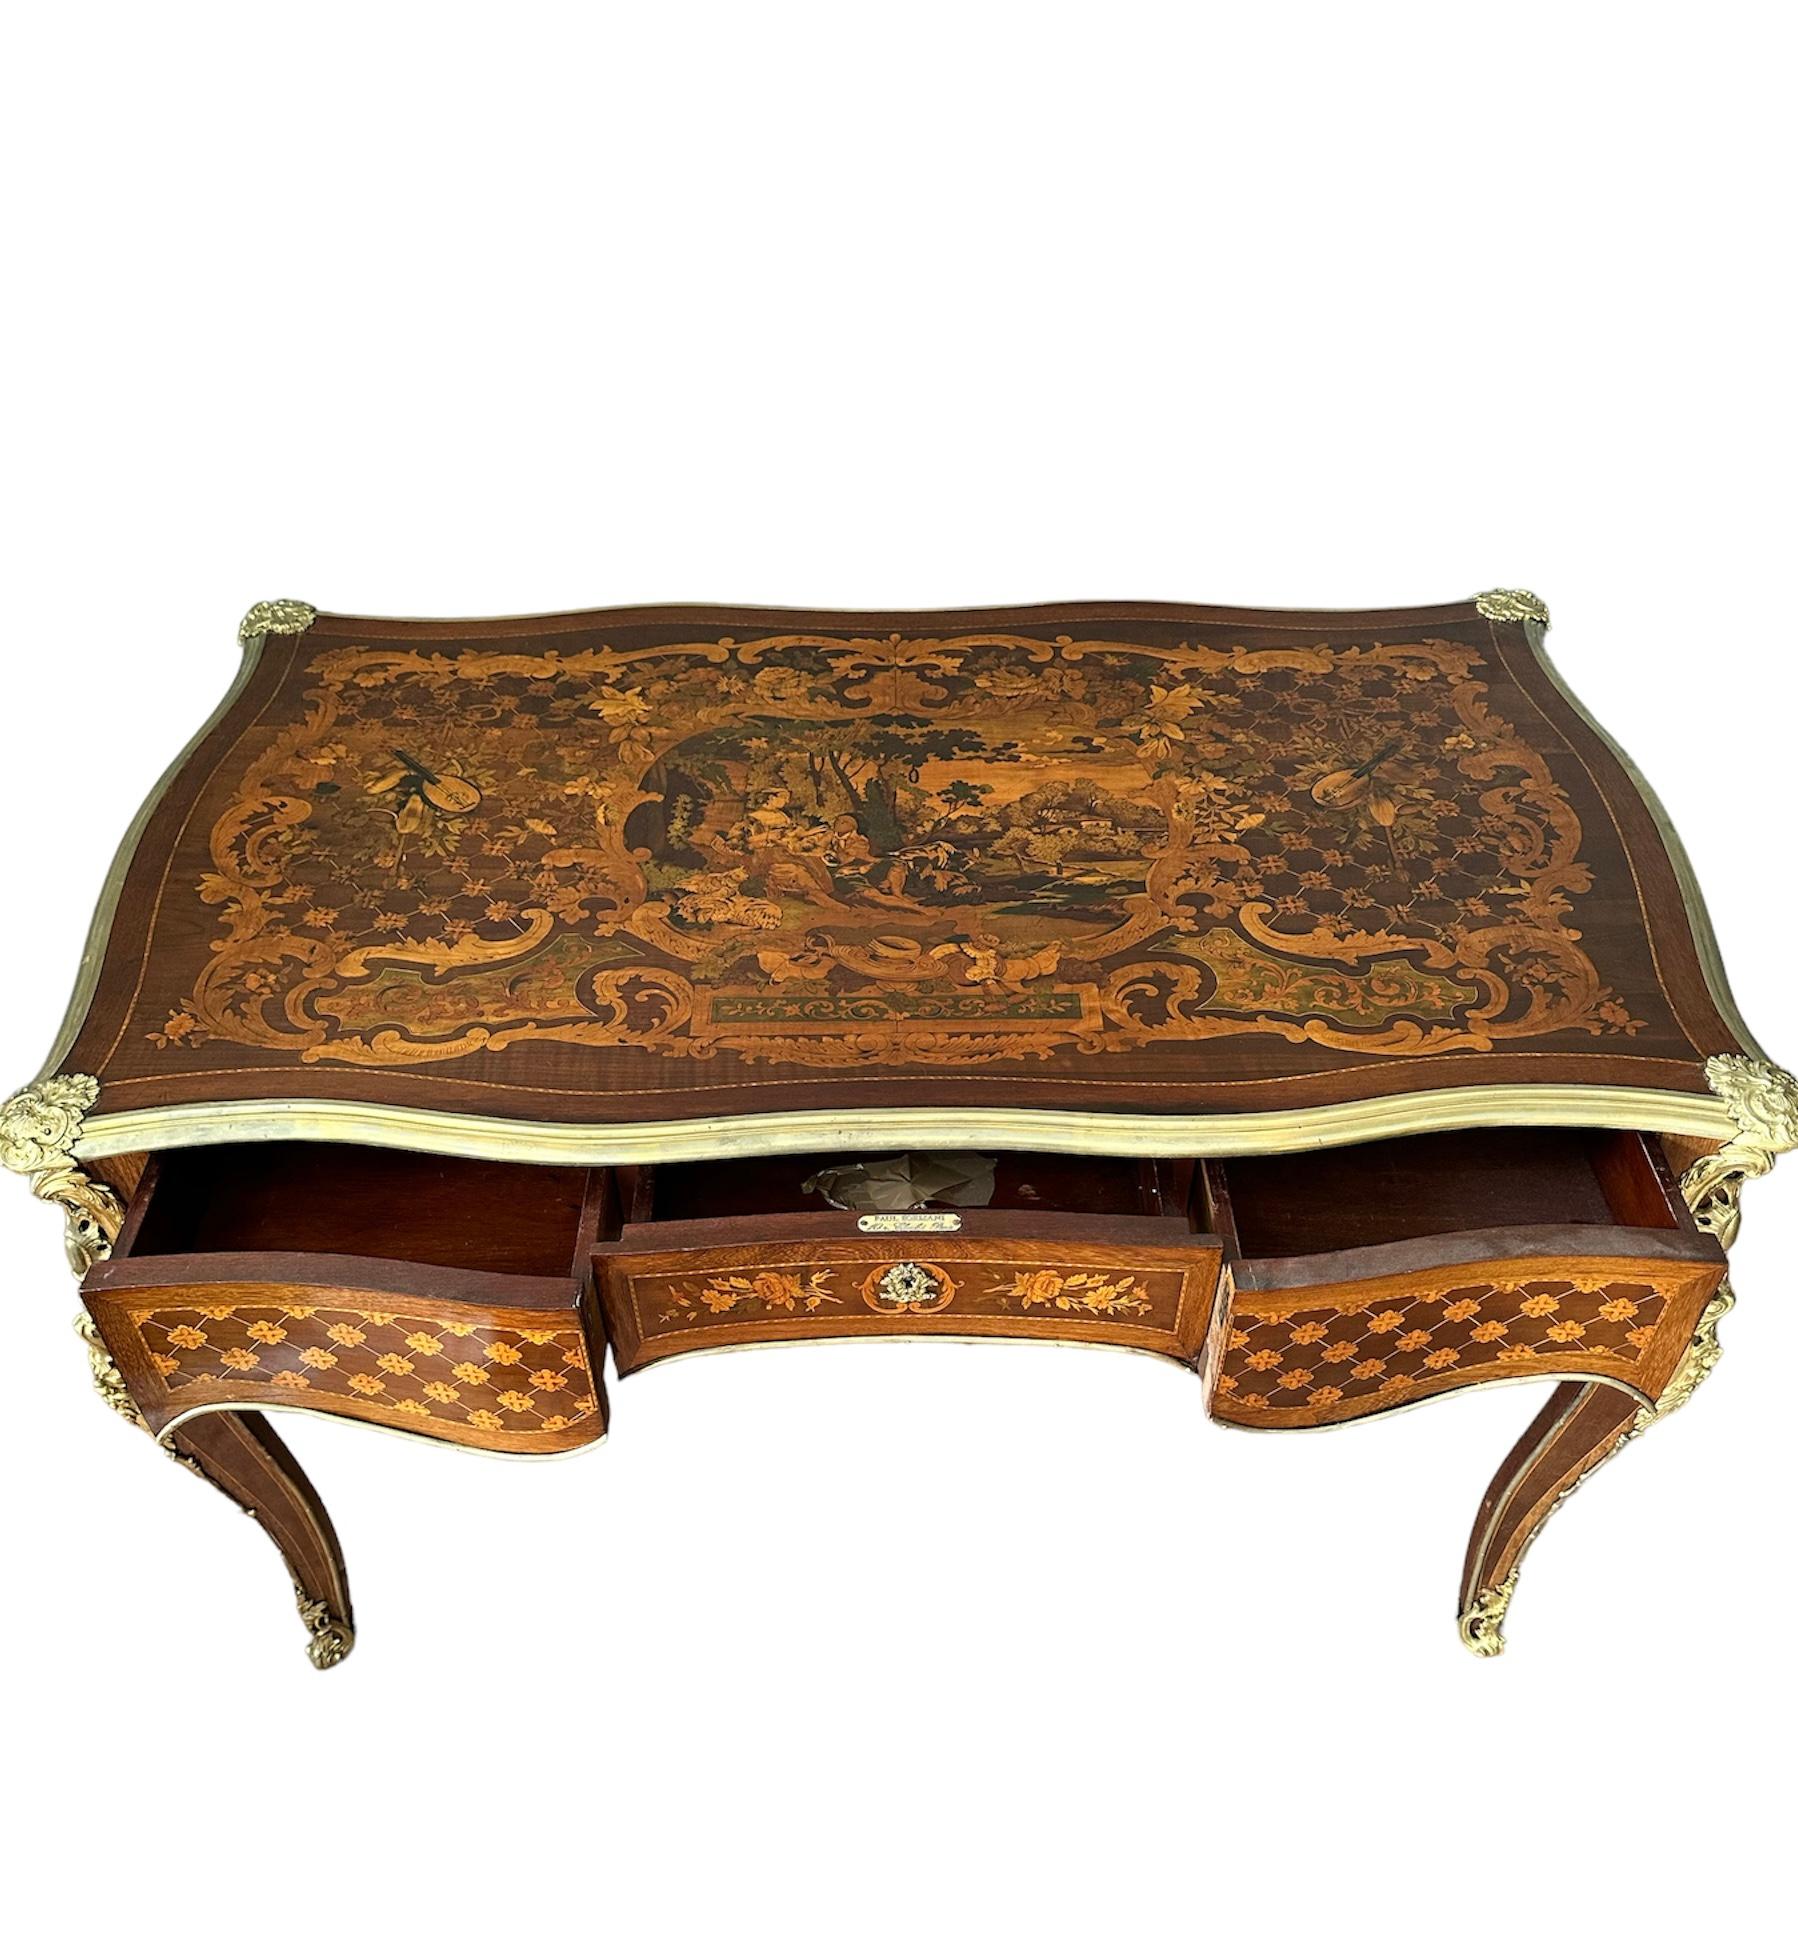 19th Century Inlaid Desk Mounted with Gilded Bronzes, by Paul Sormani 1